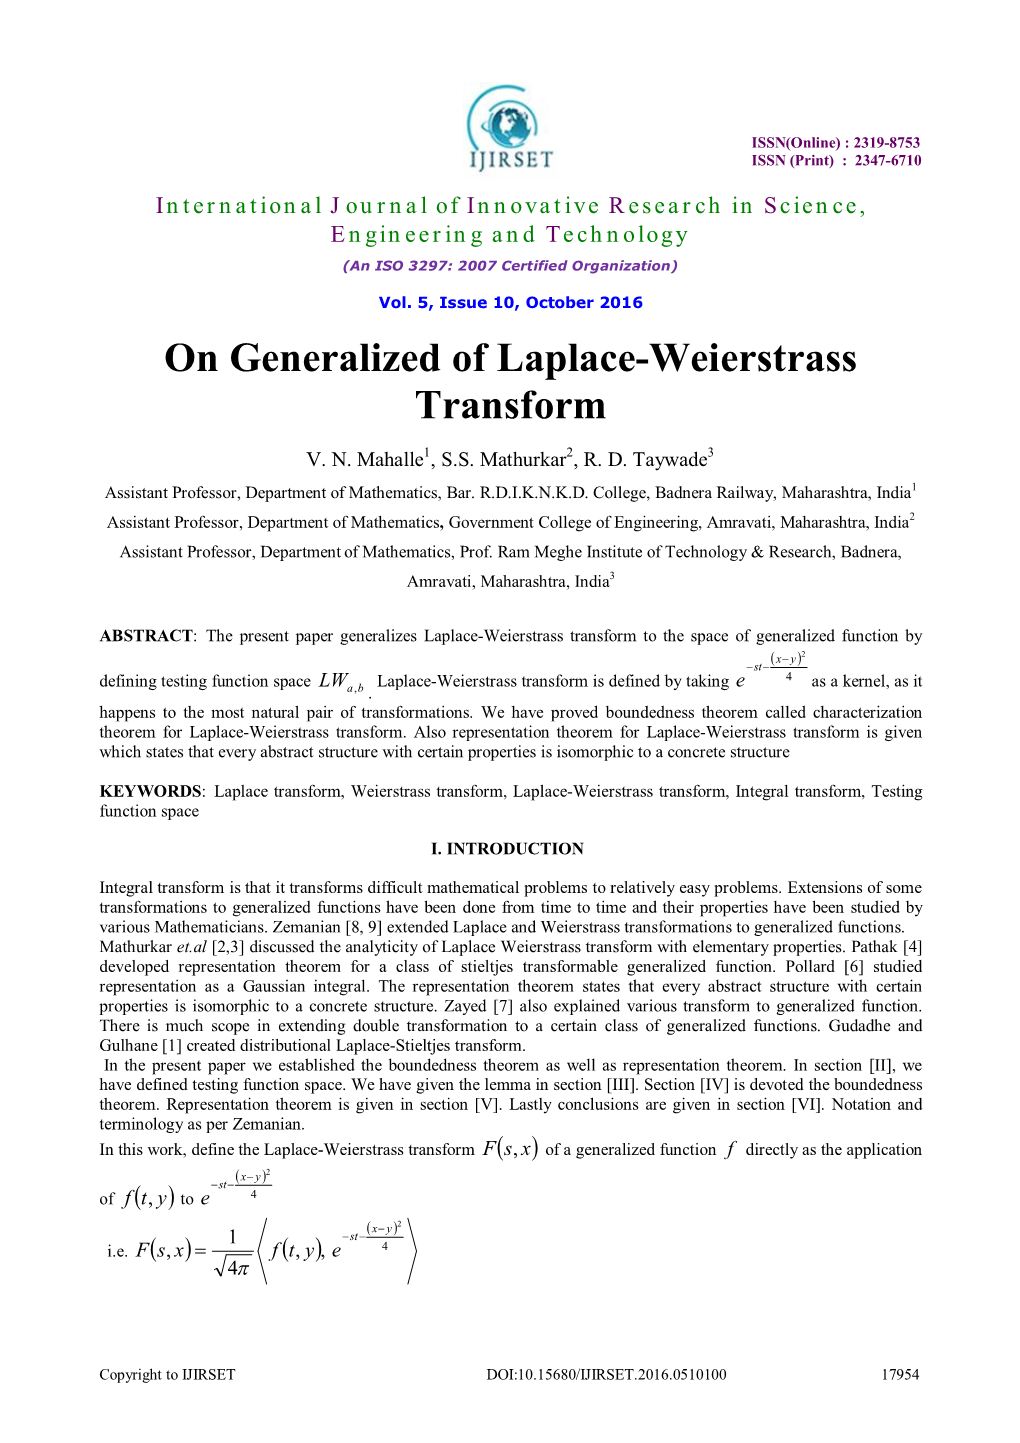 On Generalized of Laplace-Weierstrass Transform